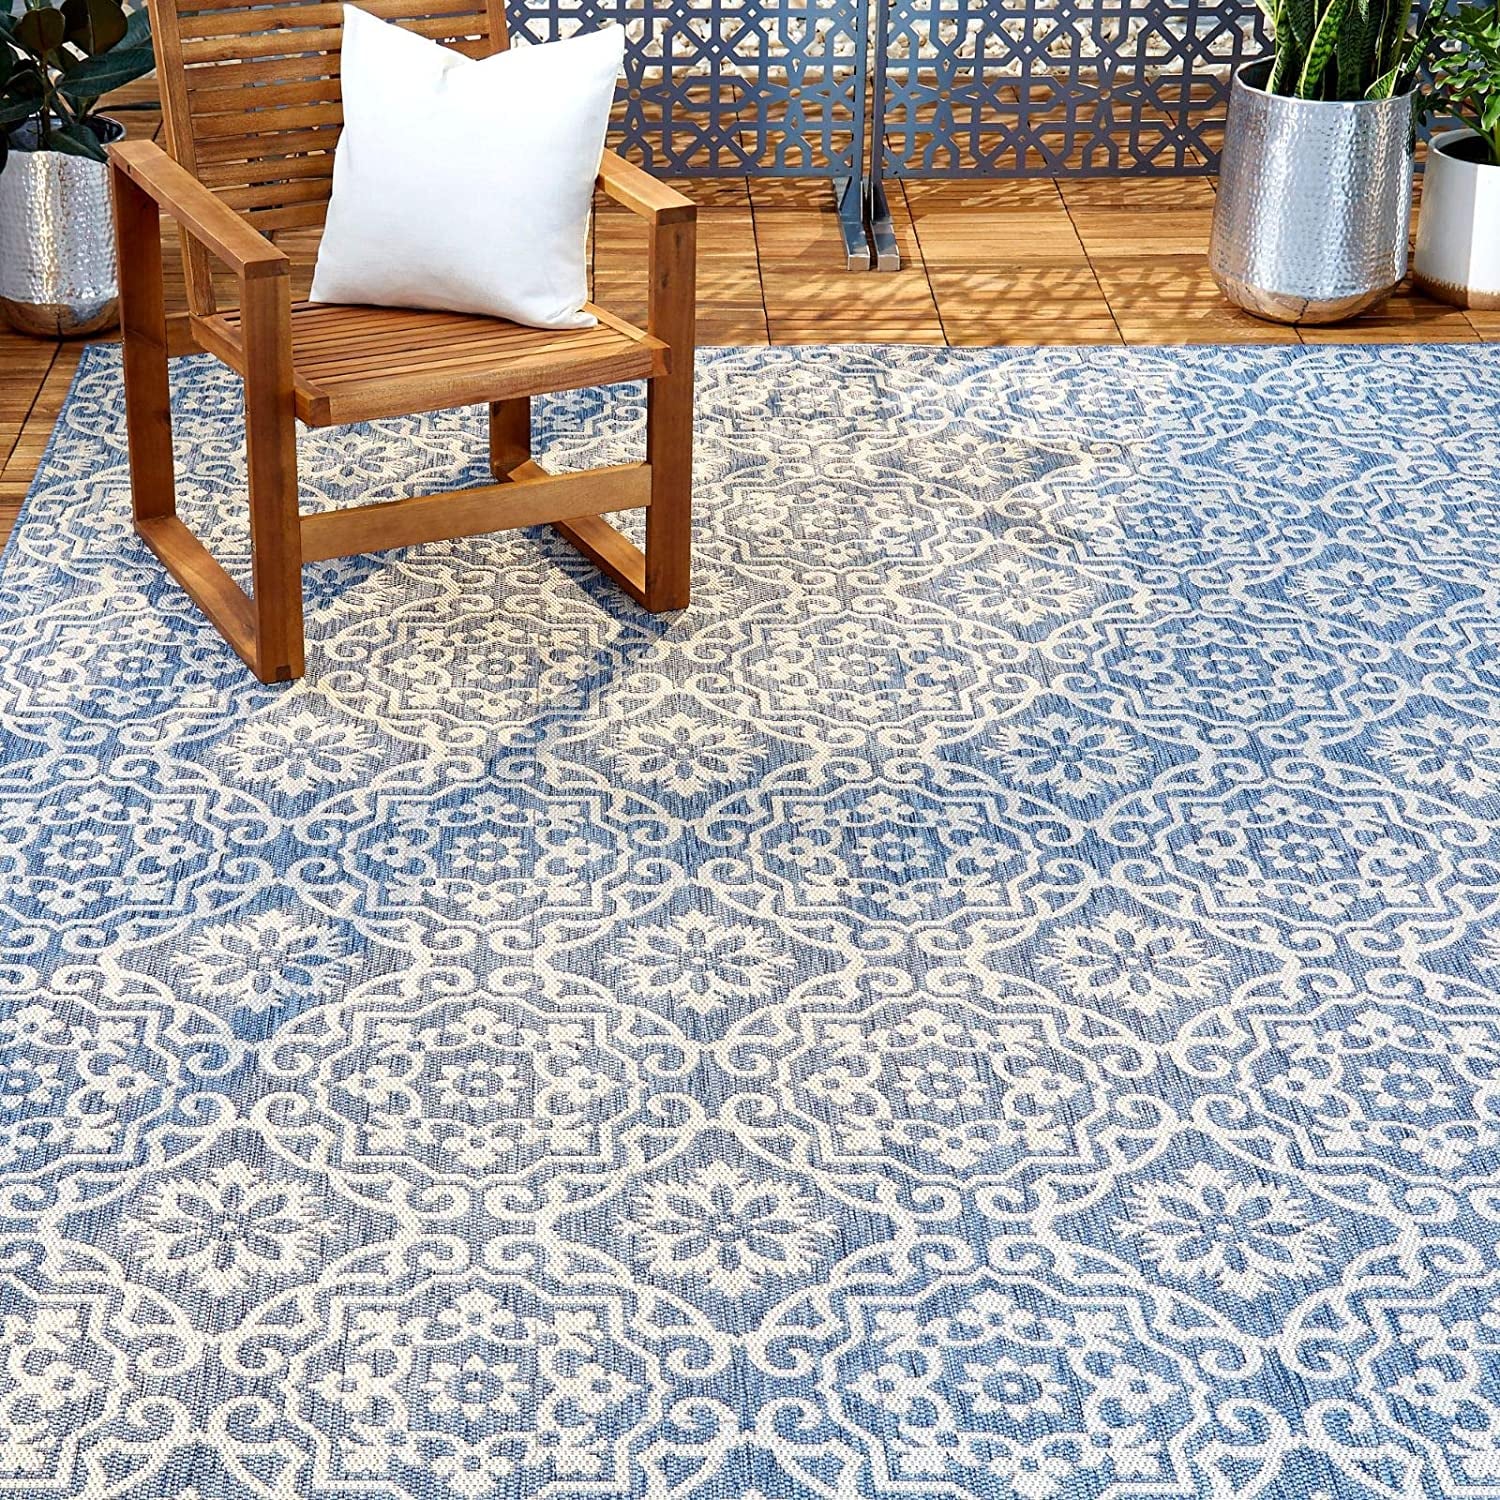 14 Affordable Outdoor Rugs 2023 — The Best Outdoor Rugs on